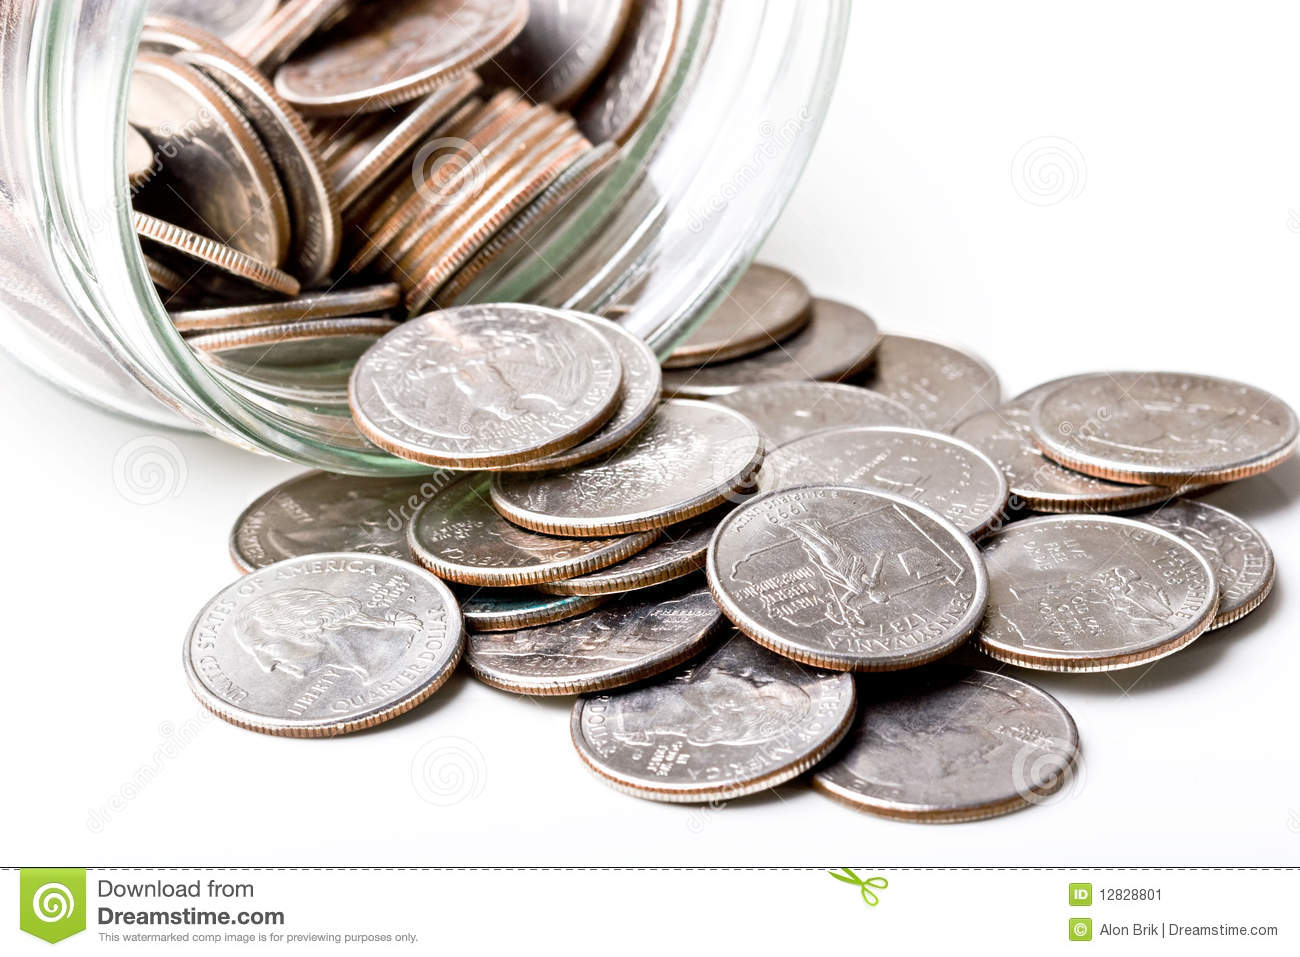 Quarters 25 Cents Change Coins In A Glass Jar Stock Image   Image